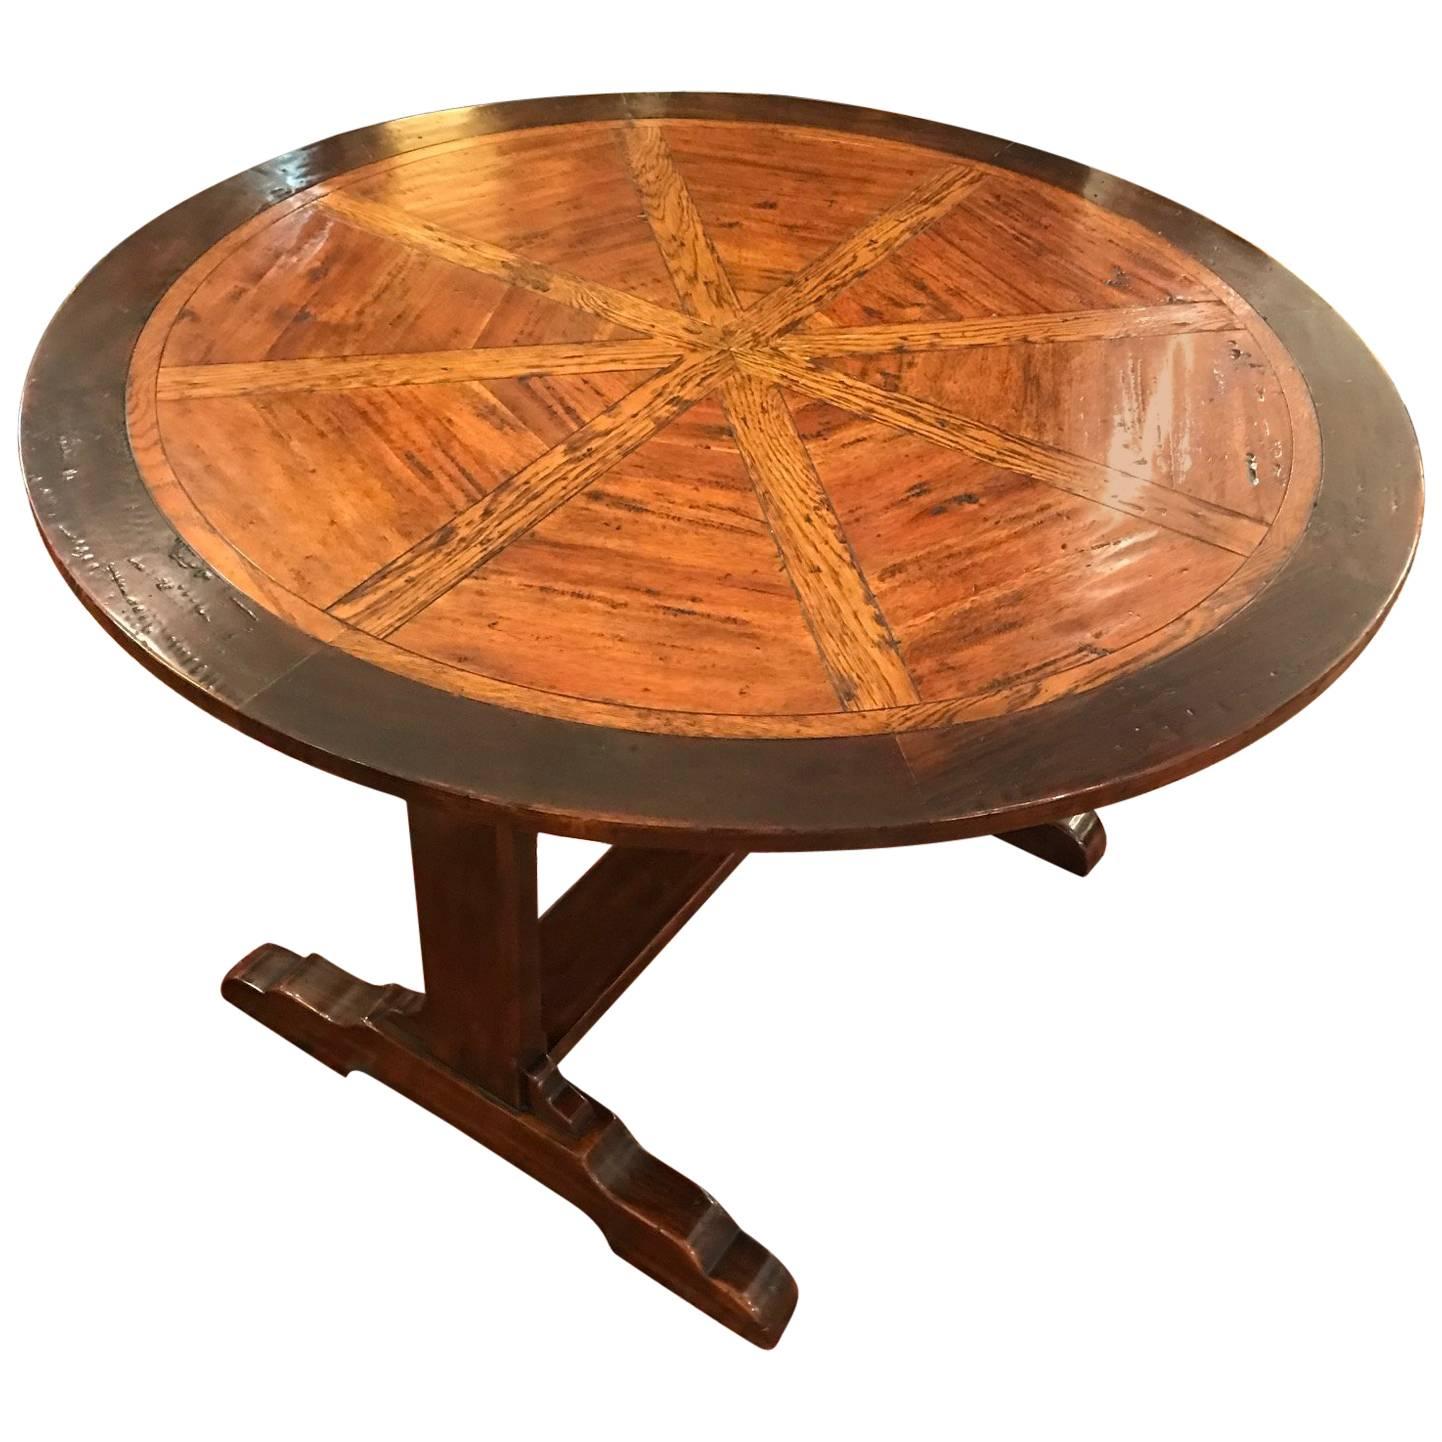 Handsome Mixed Wood Tilt-Top Round Dining Table